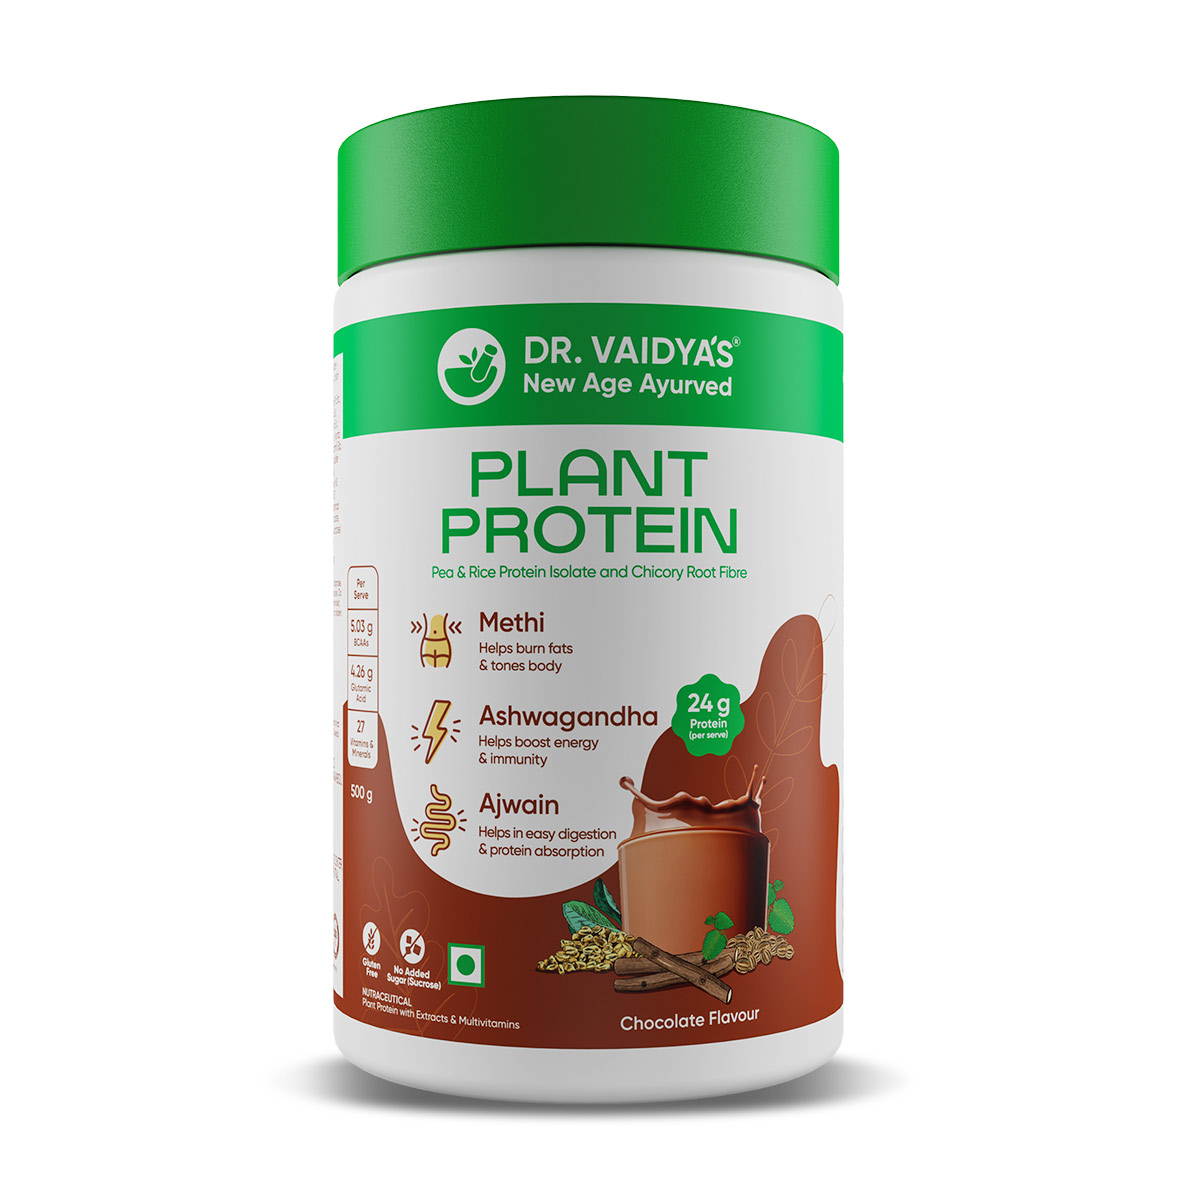 Buy Dr Vaidya's Plant Protein For CHOCOLATE FLAVOUR at Best Price Online